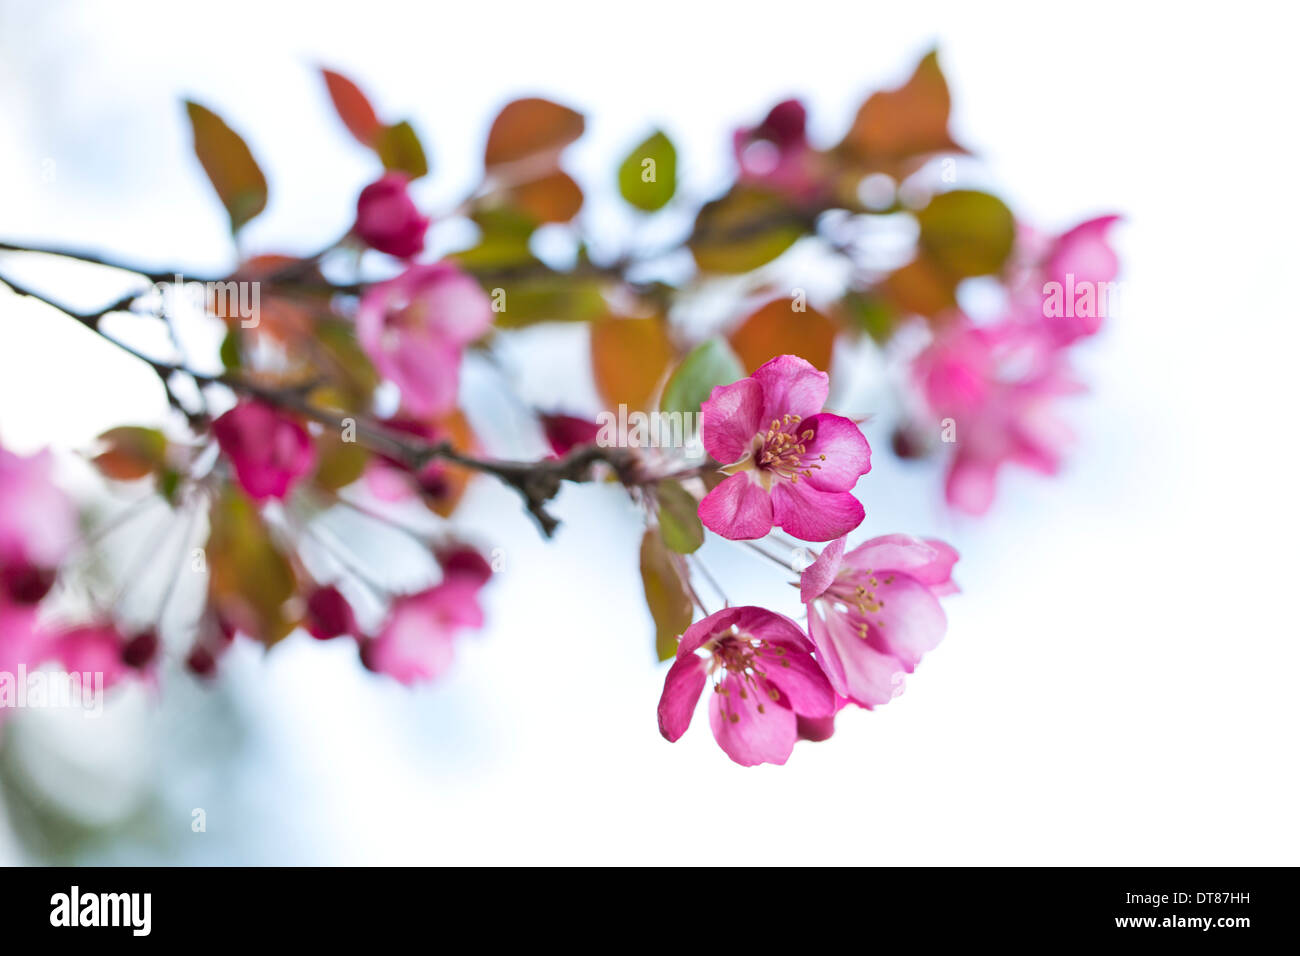 Pink crab apple flower blossoms in the spring with light background Stock Photo